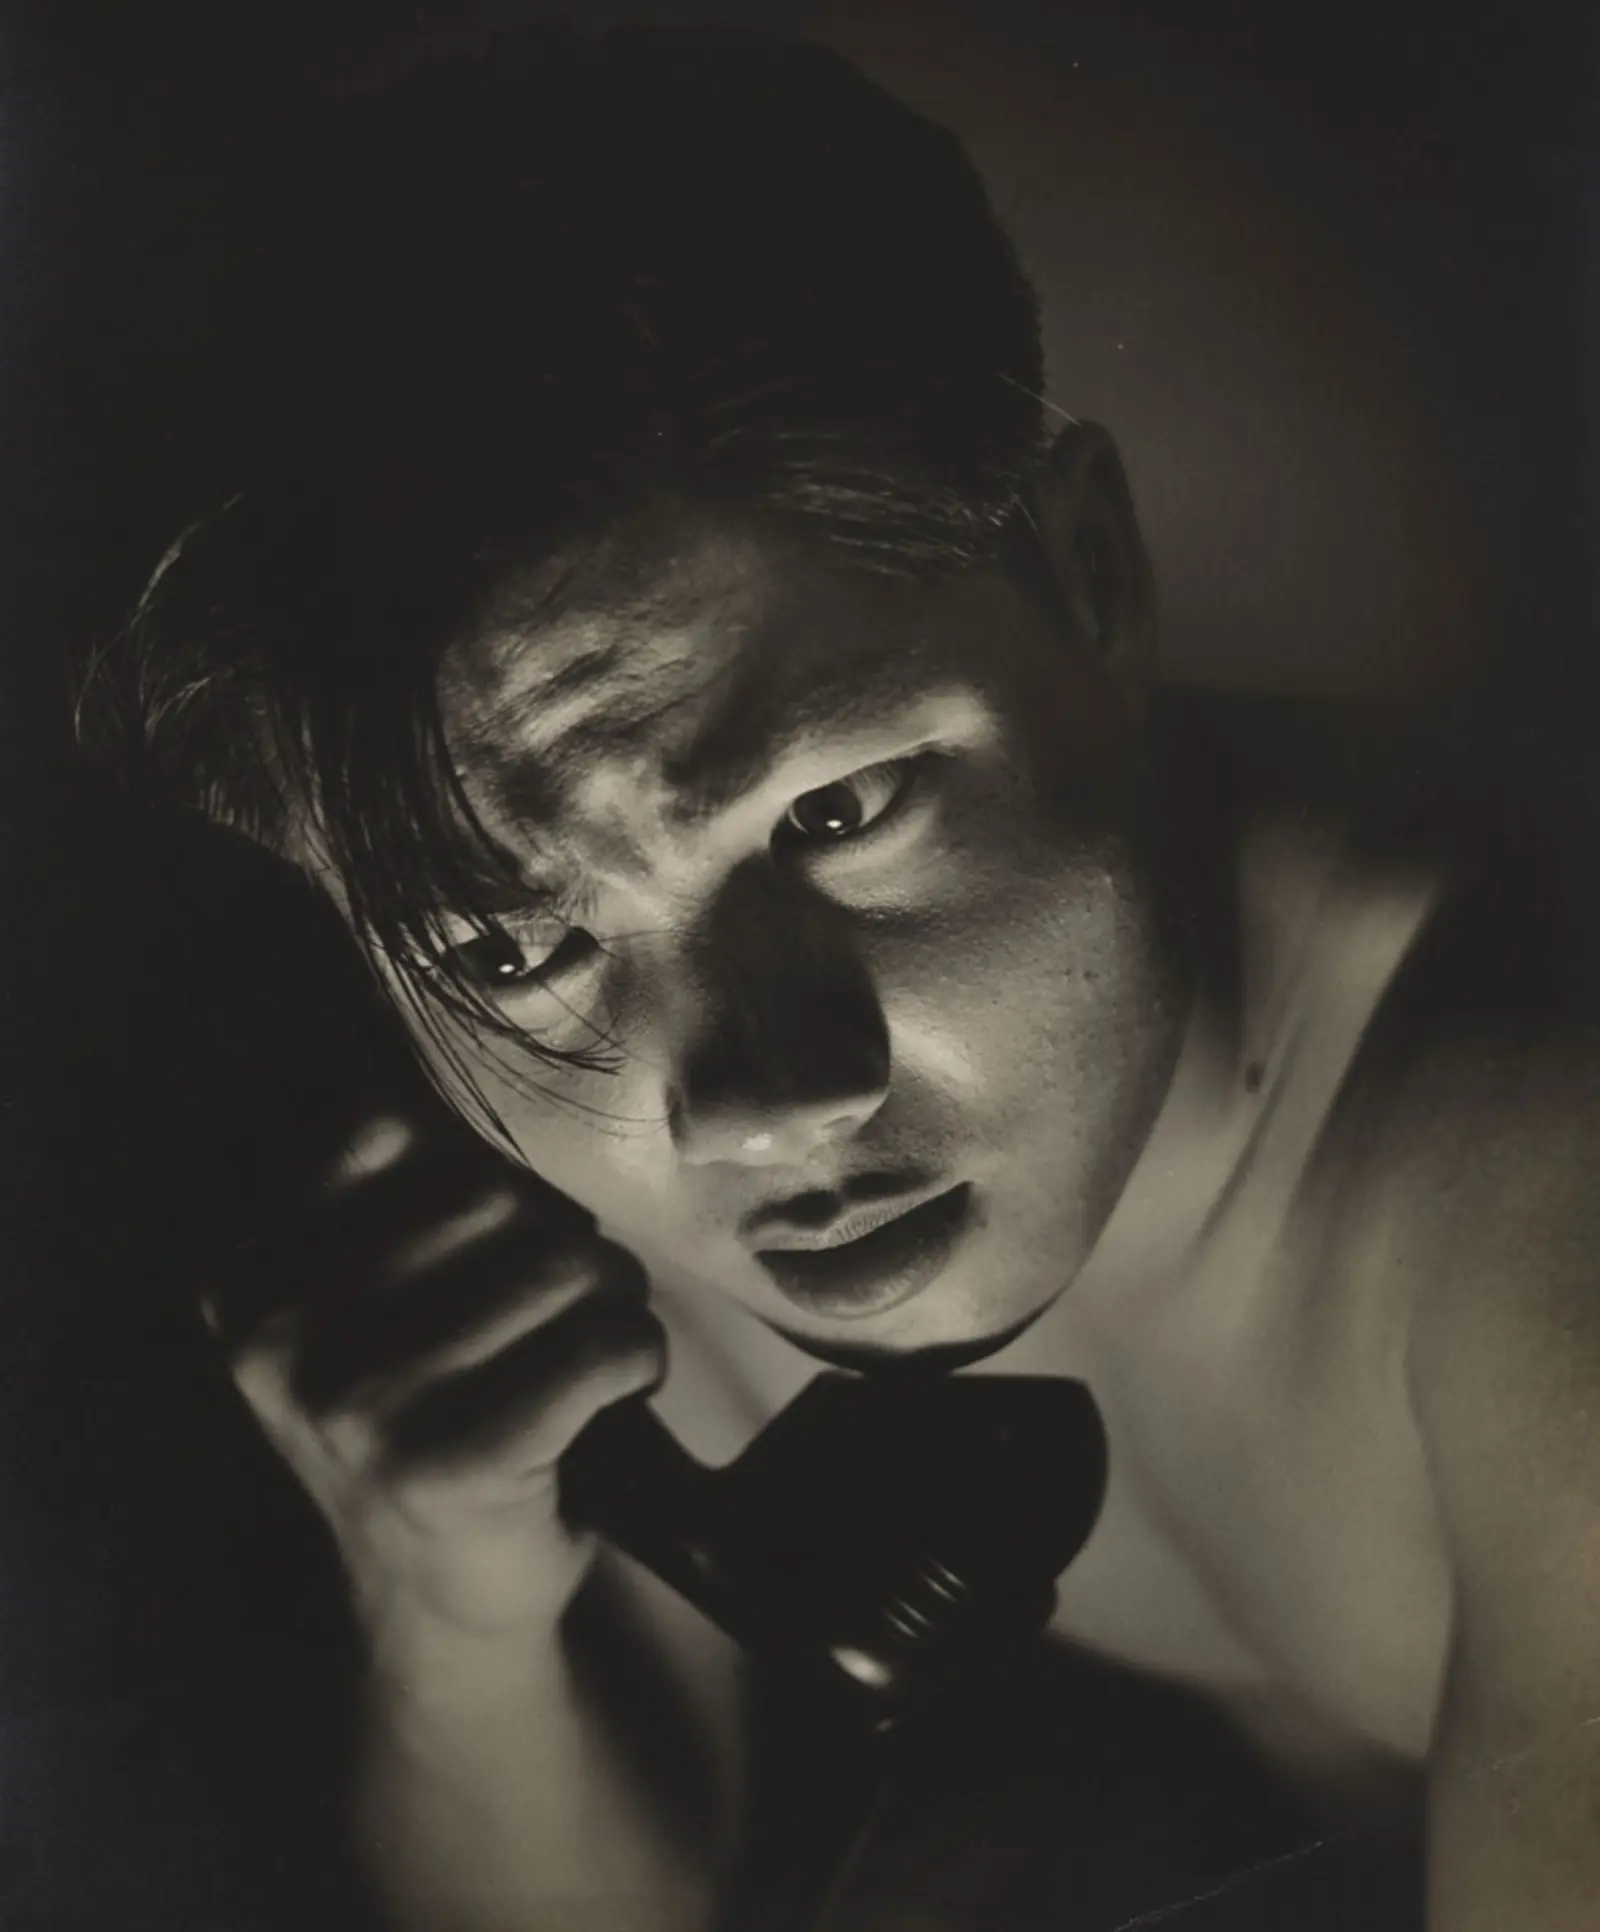 Black-and-white photograph of a person on the phone.